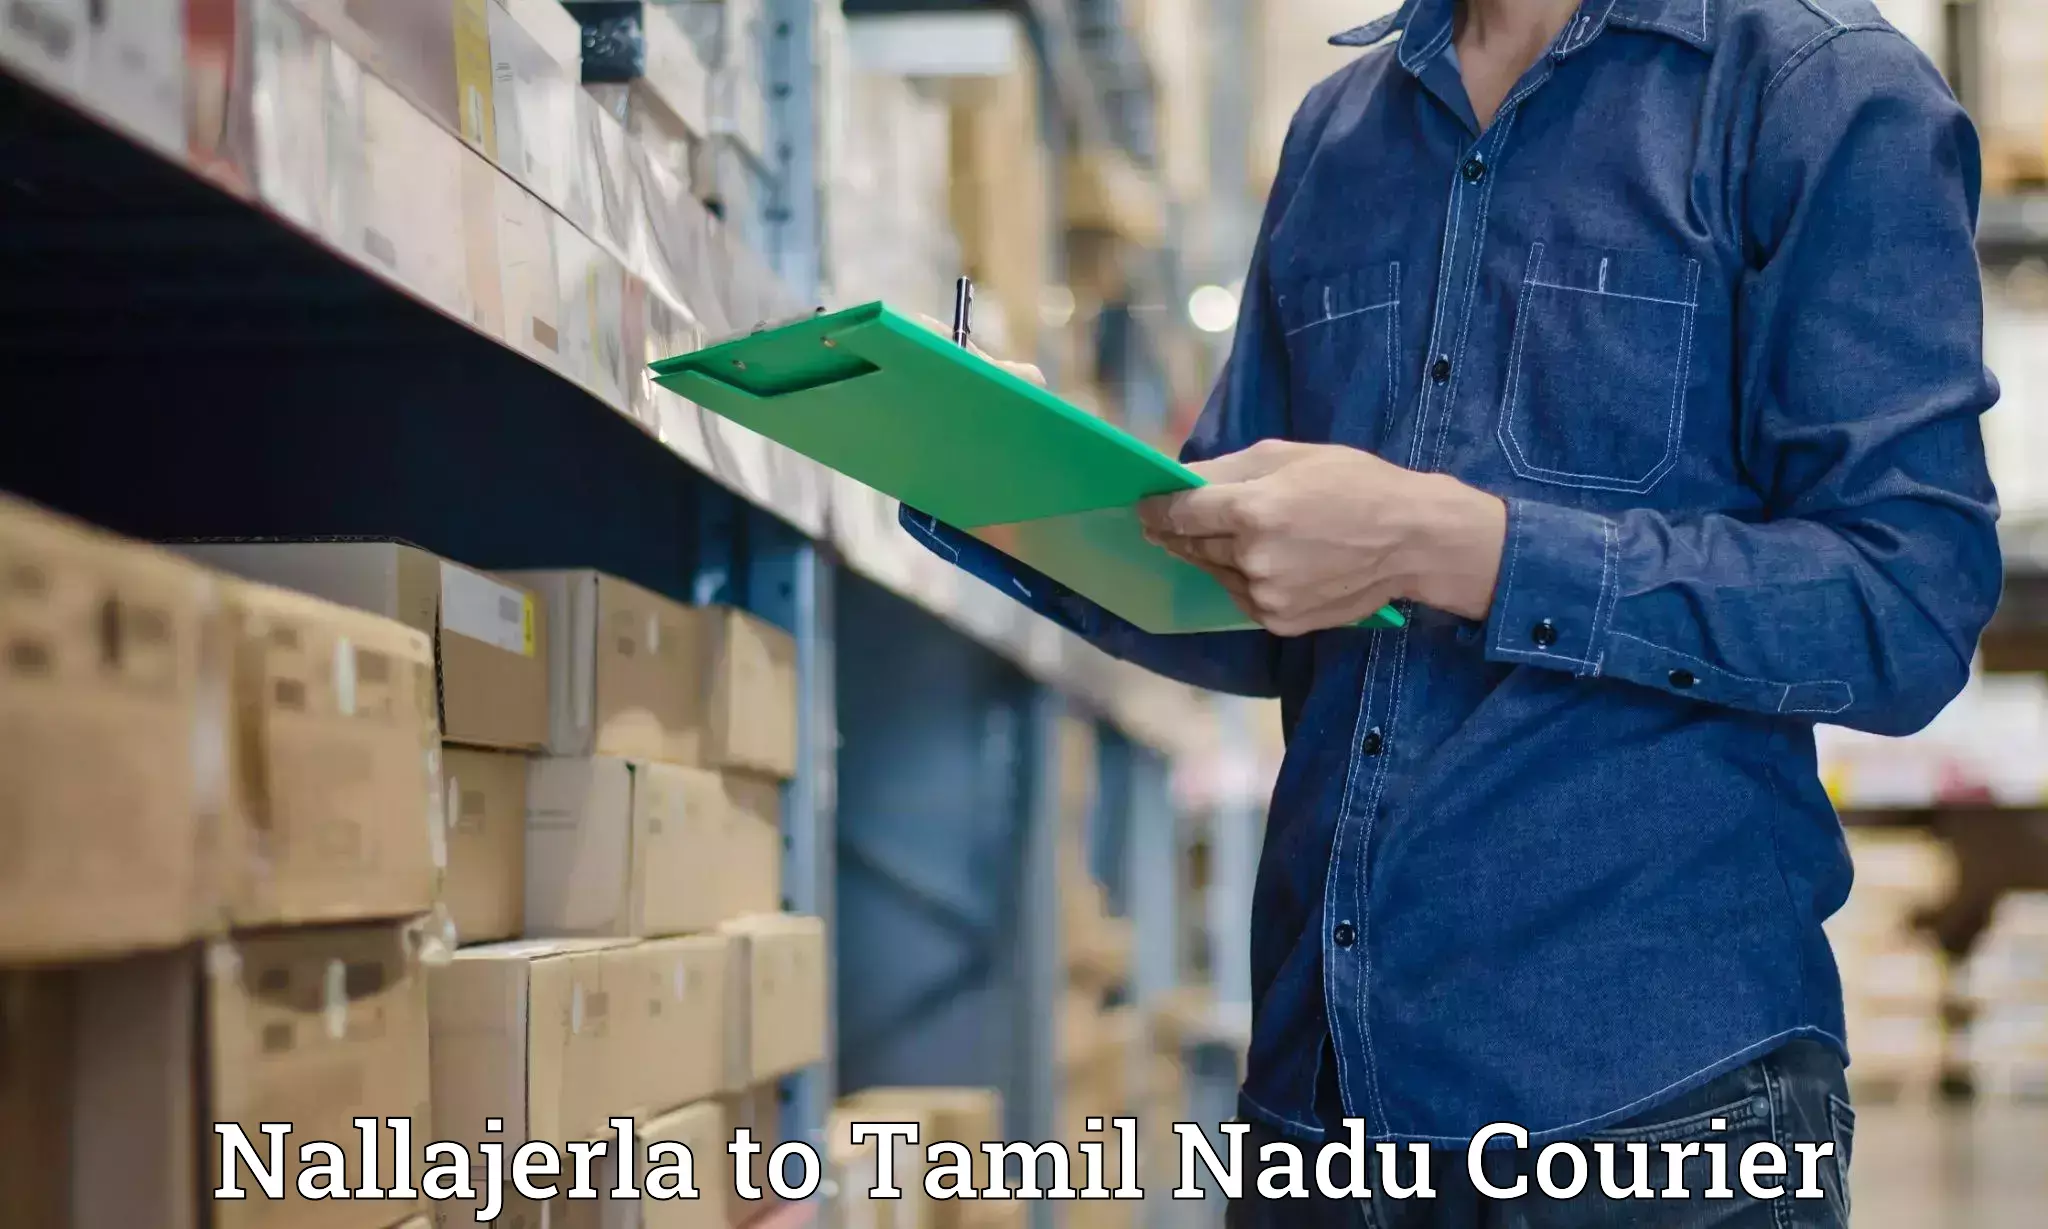 Personal courier services Nallajerla to Pennadam